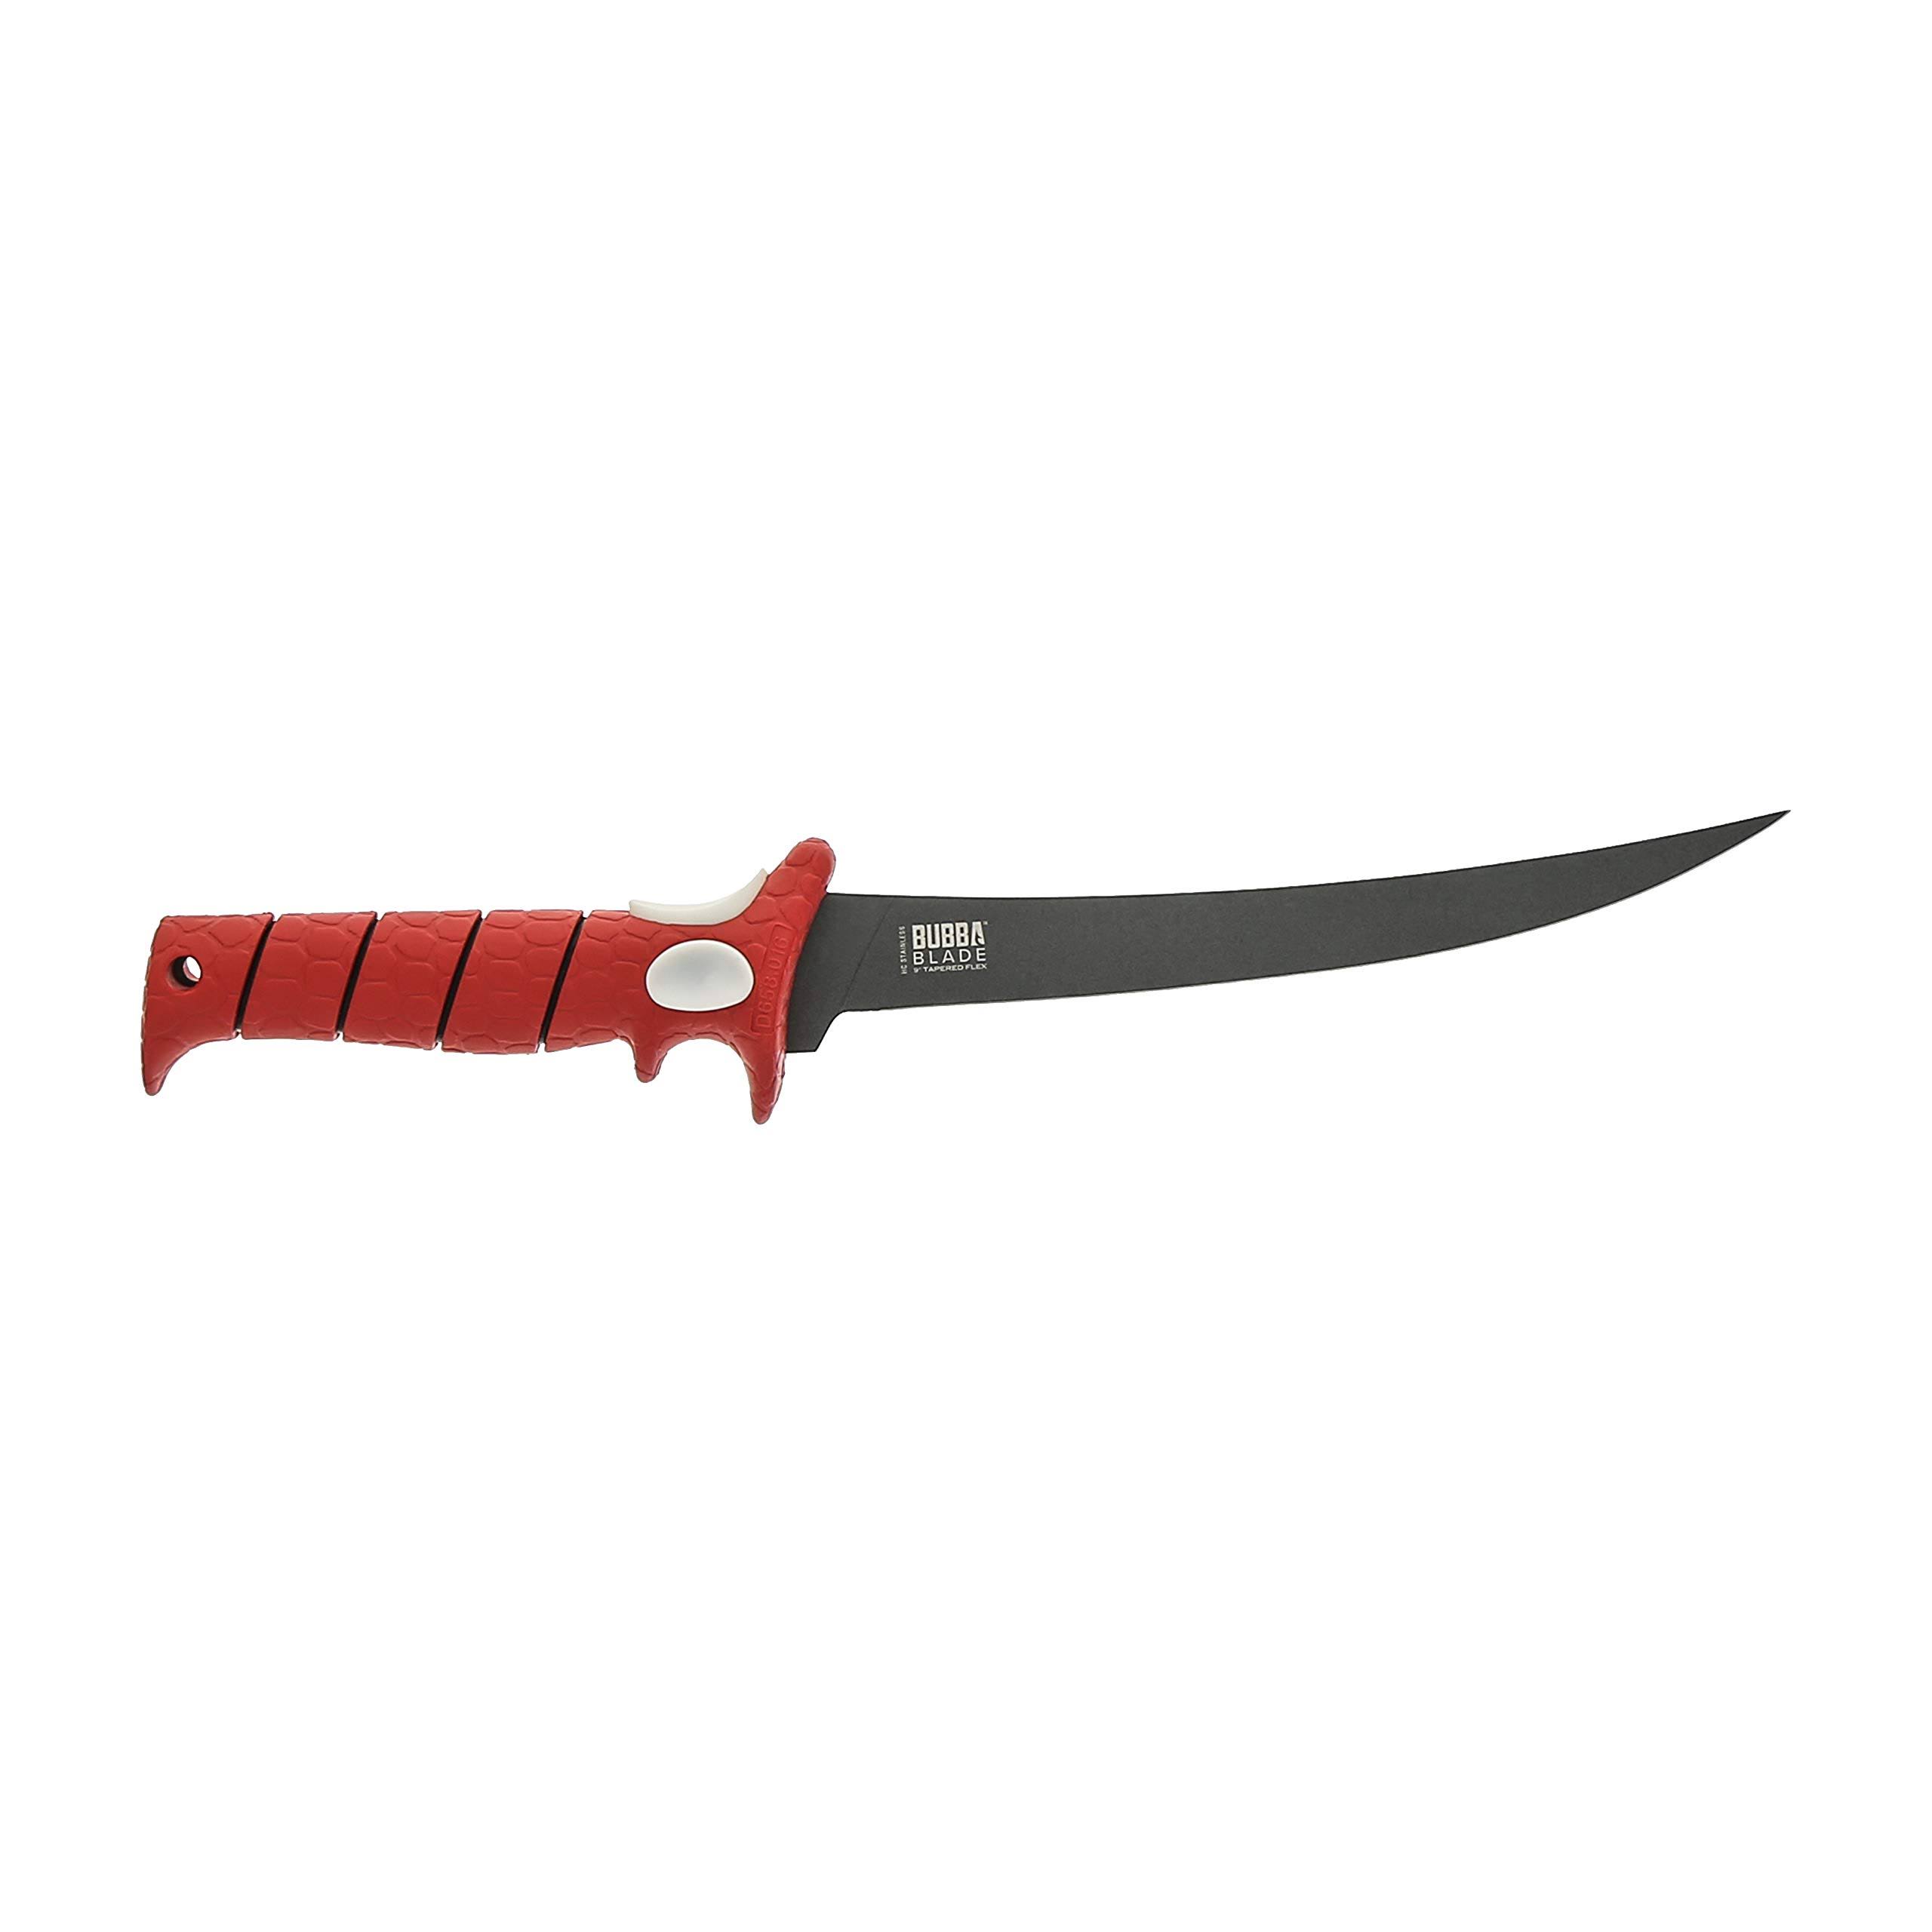 Bubba Blade Flex Fillet Knife with No Slip Grip Handle and Case - 9"